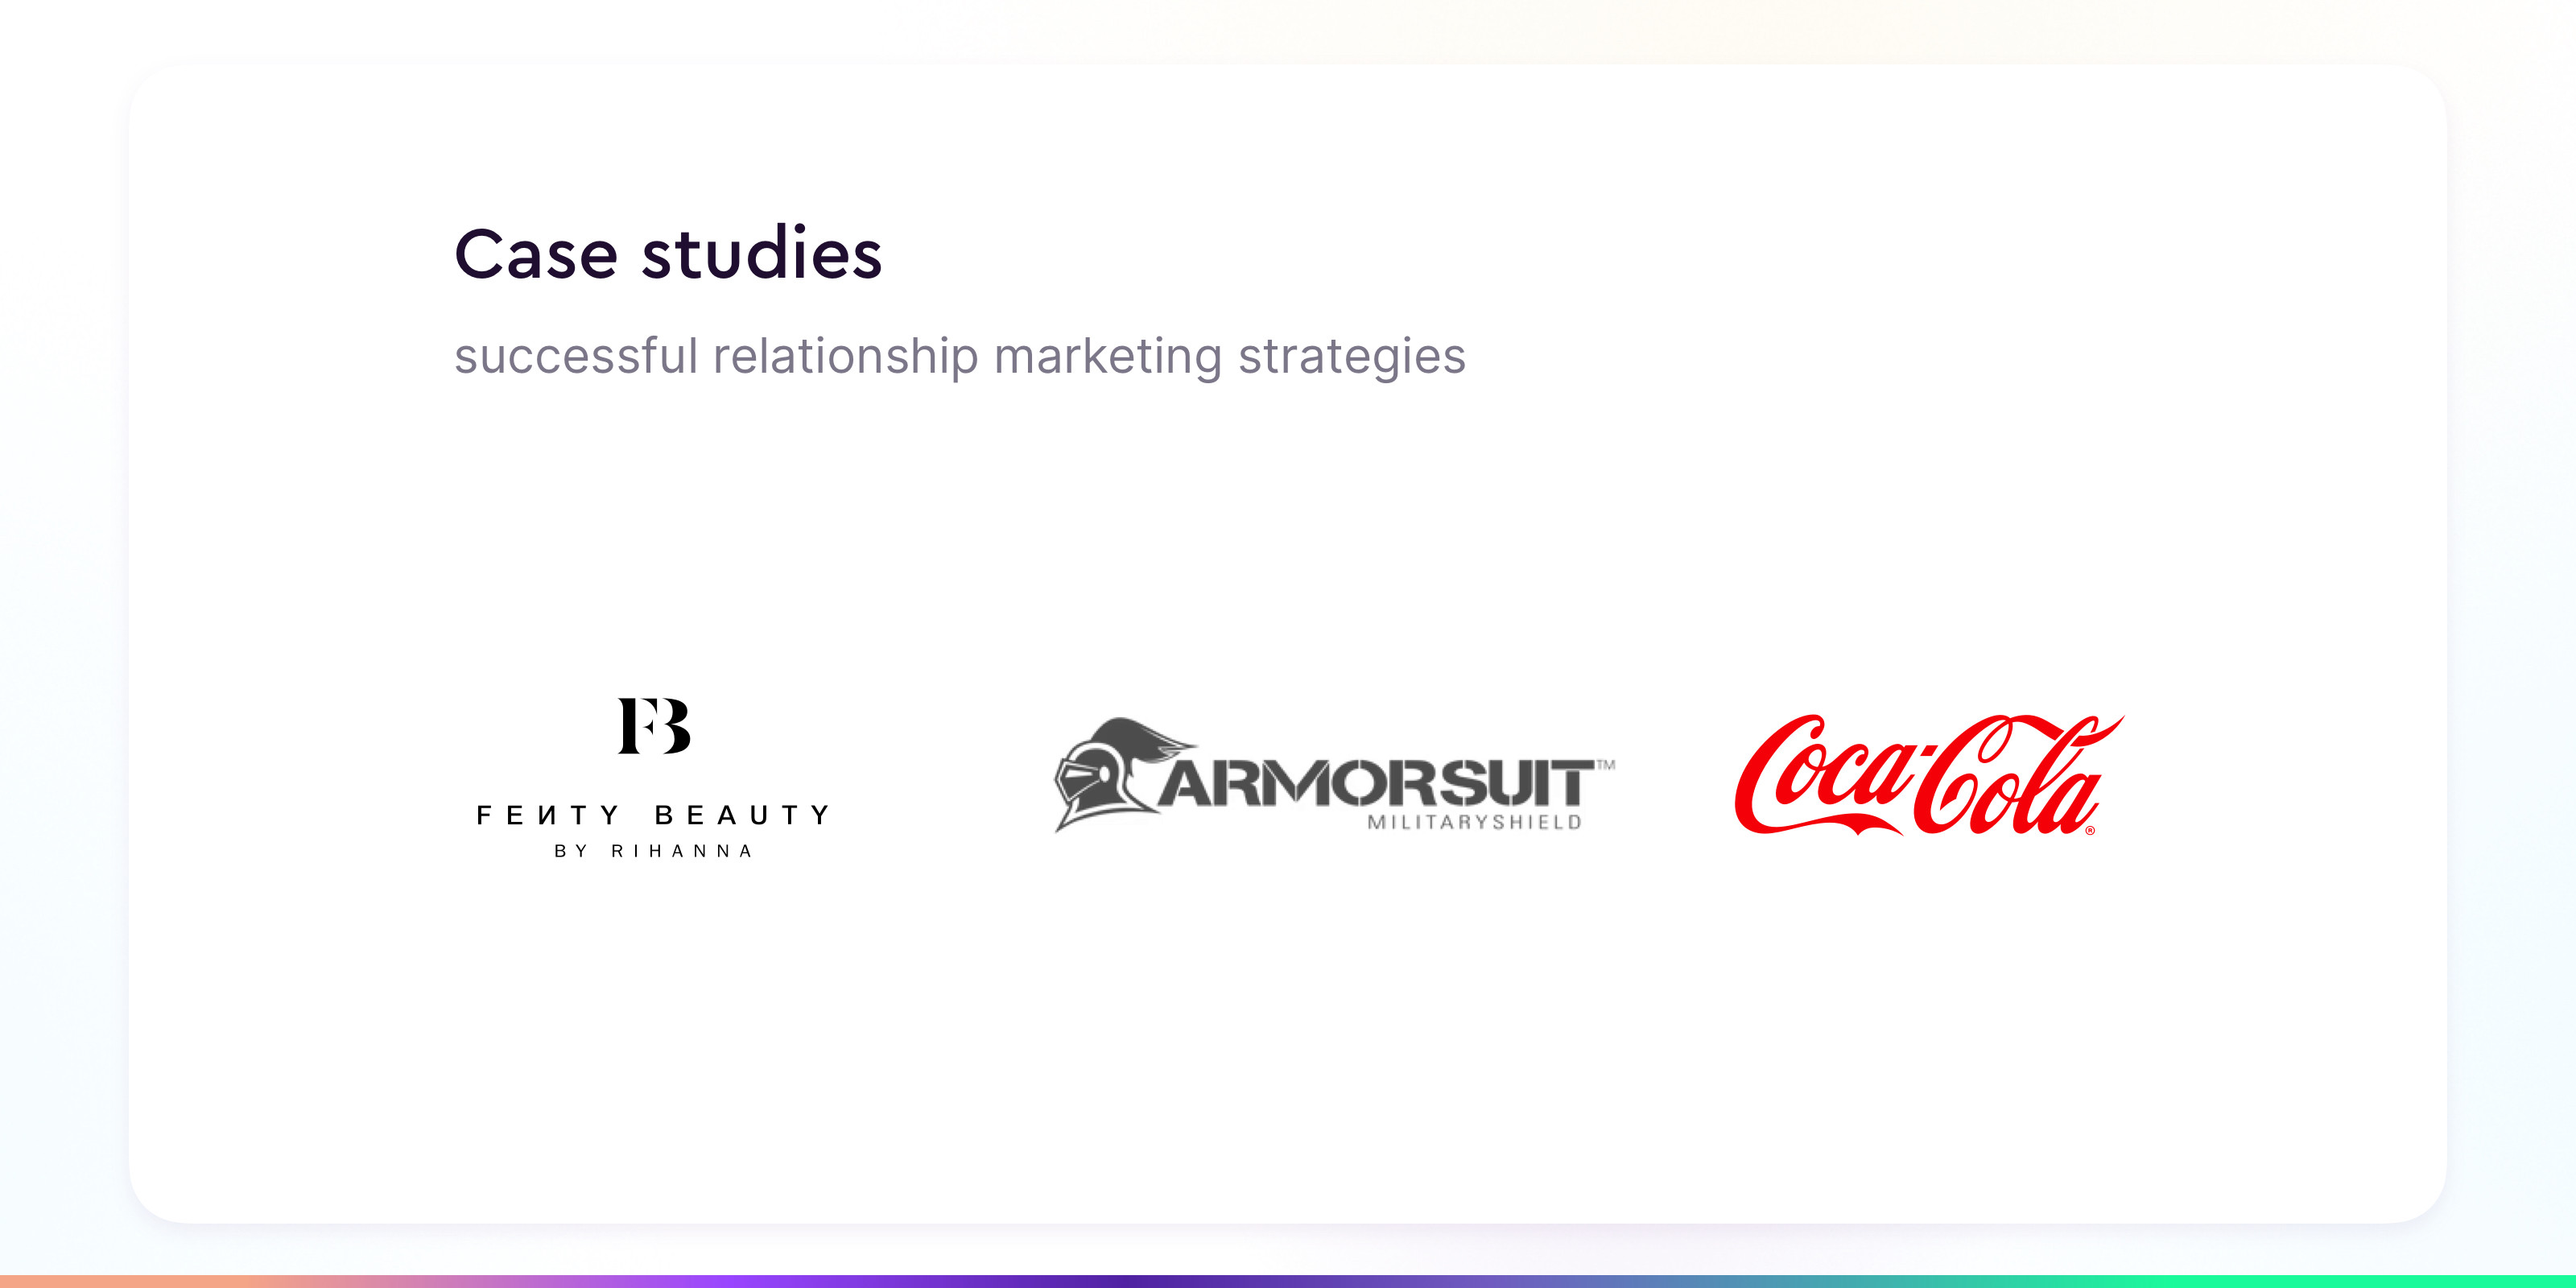 case studies for your relationship marketing strategy